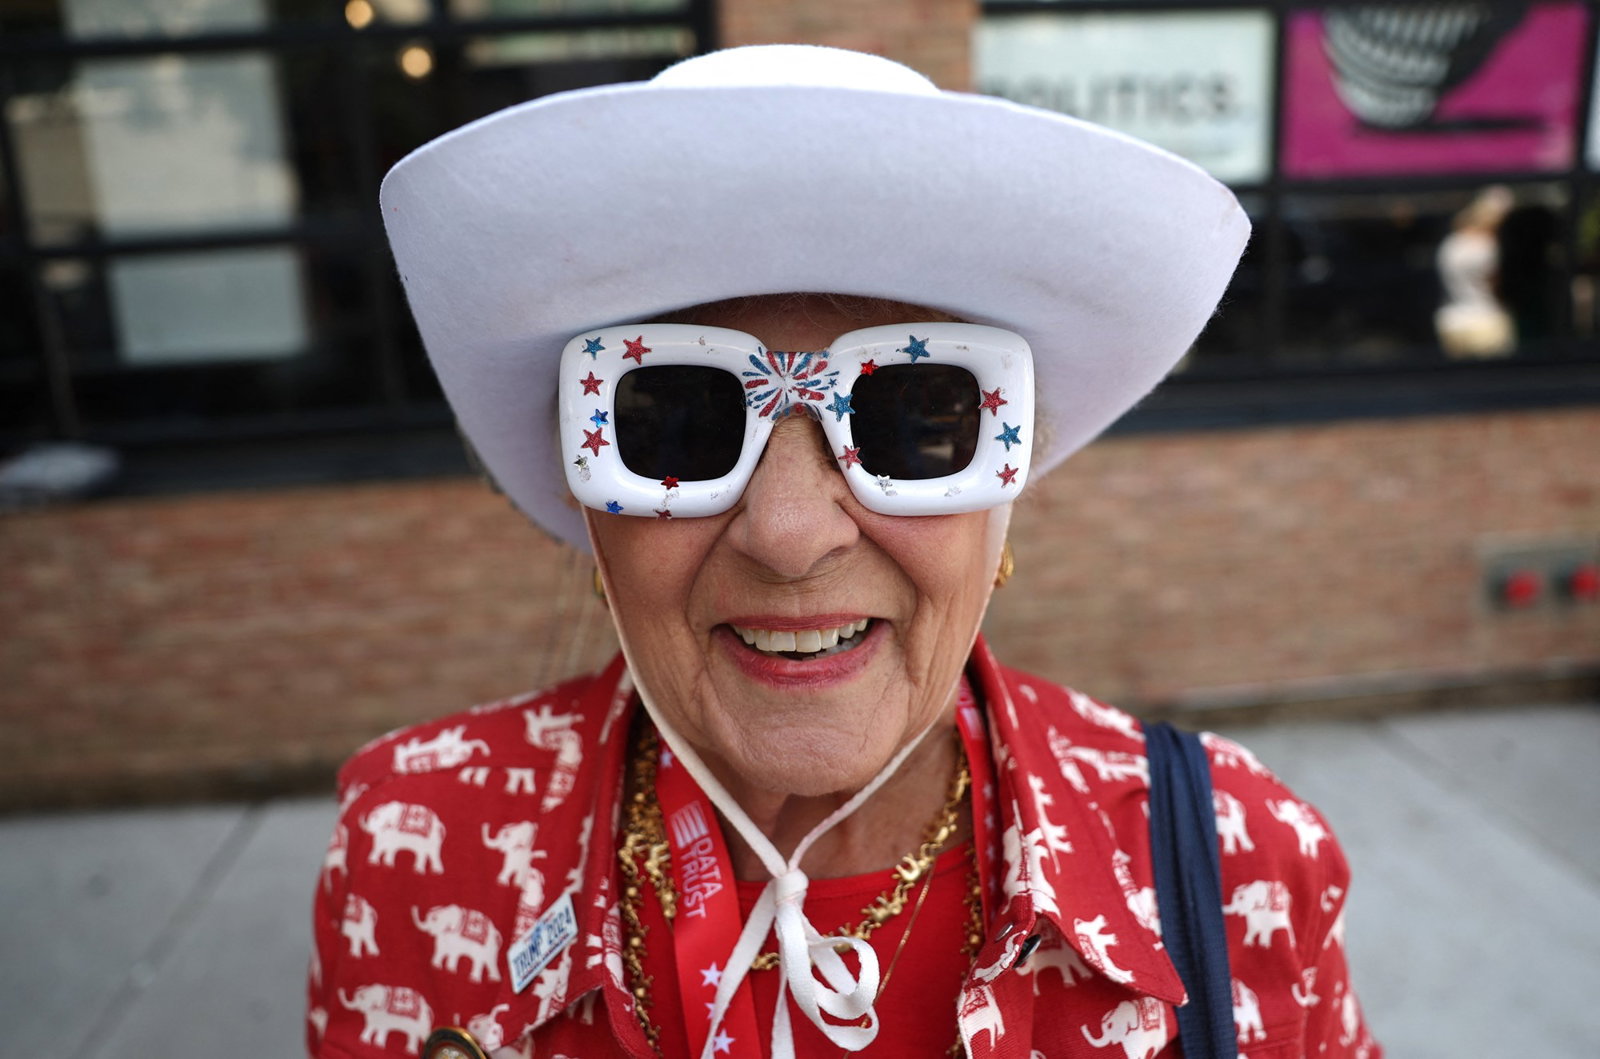 A woman wears a large white hat and novelty sunglasses with blue and red stars.